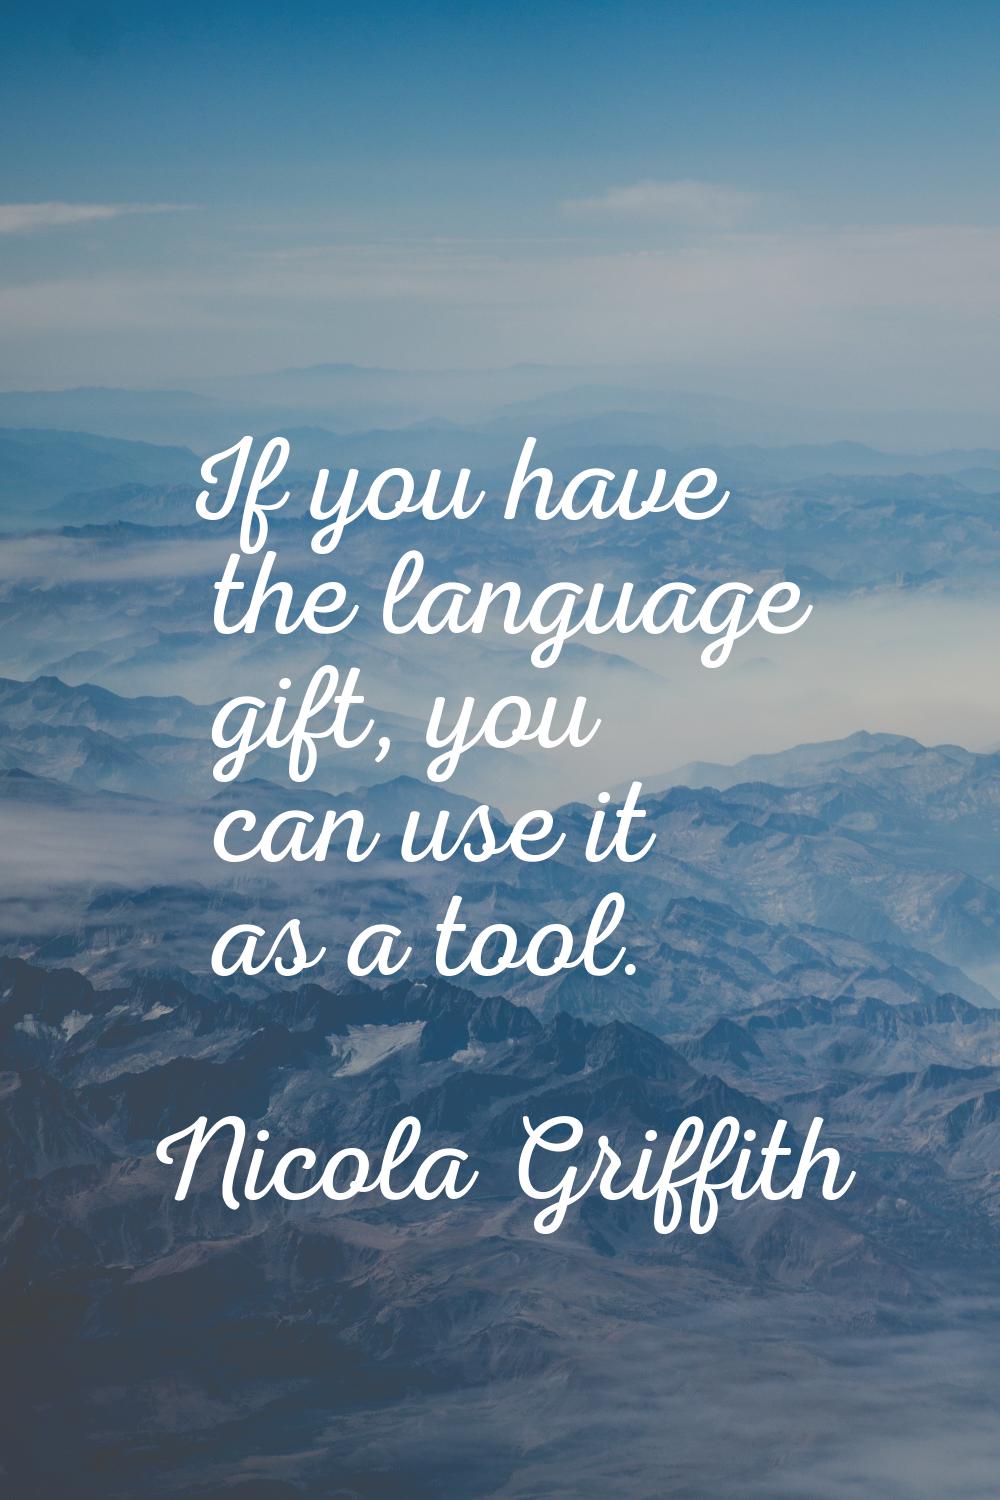 If you have the language gift, you can use it as a tool.